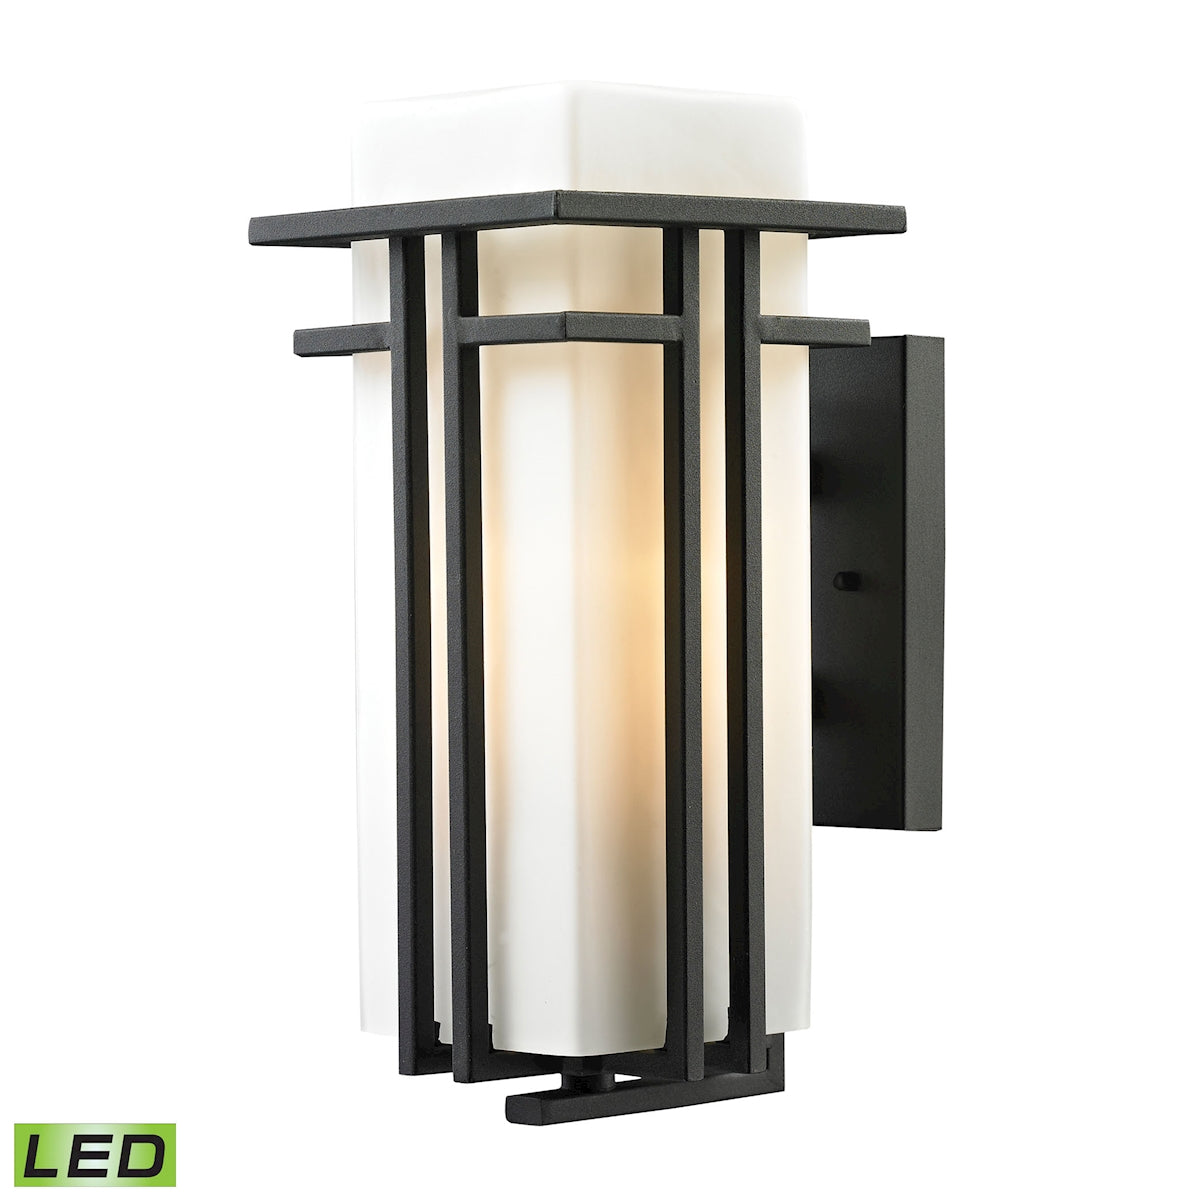 ELK Lighting 45086/1-LED Croftwell 1-Light Outdoor Wall Lamp in Textured Matte Black - Includes LED Bulb